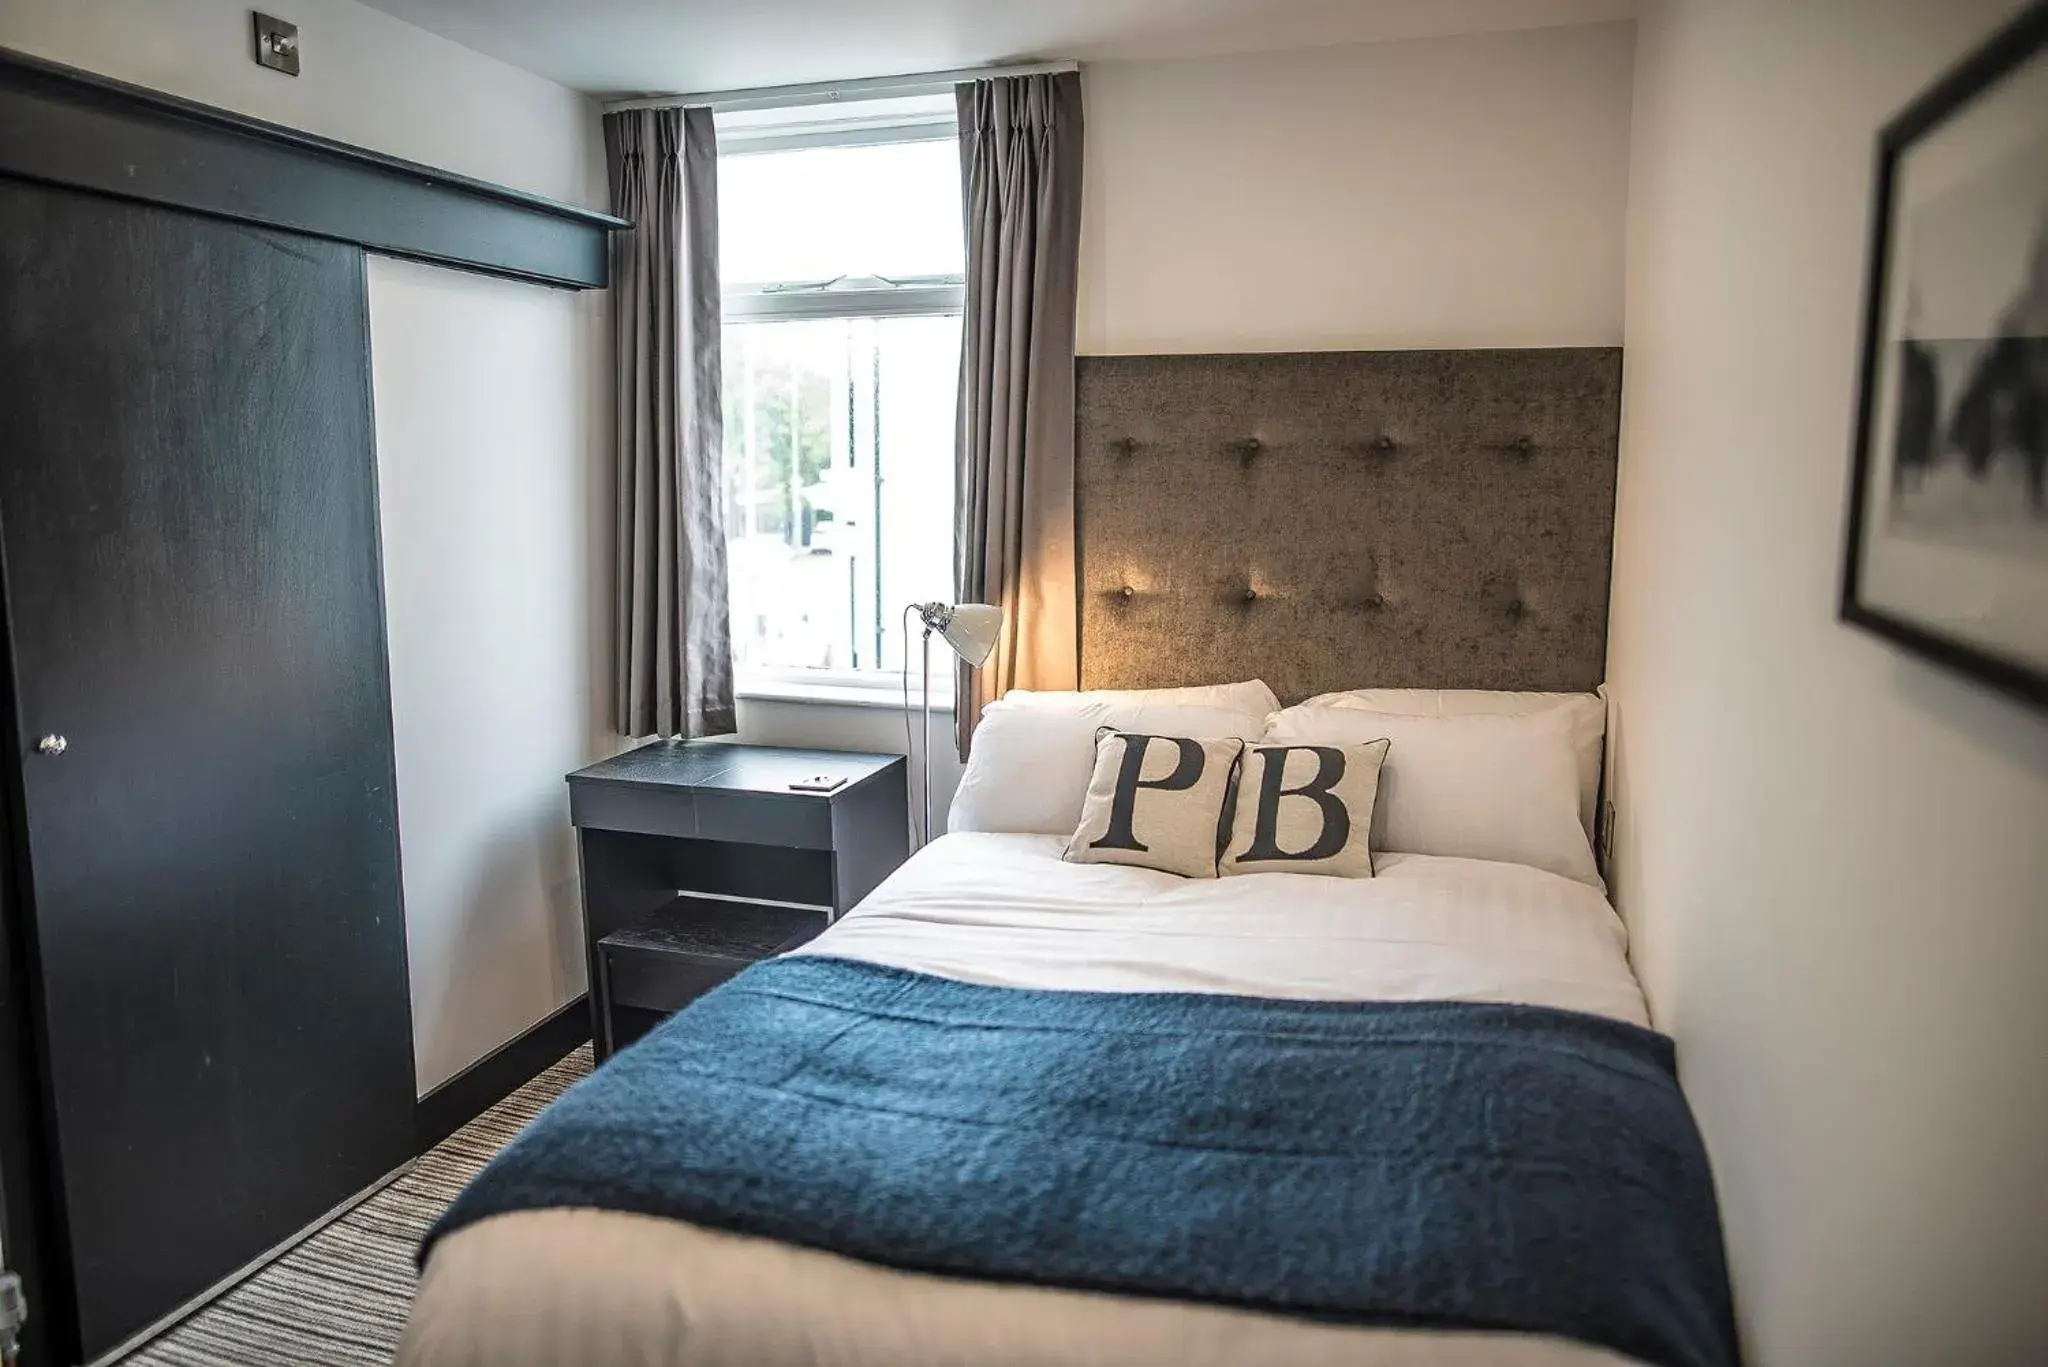 Property building, Room Photo in Peaky Blinders Accommodation & Bar